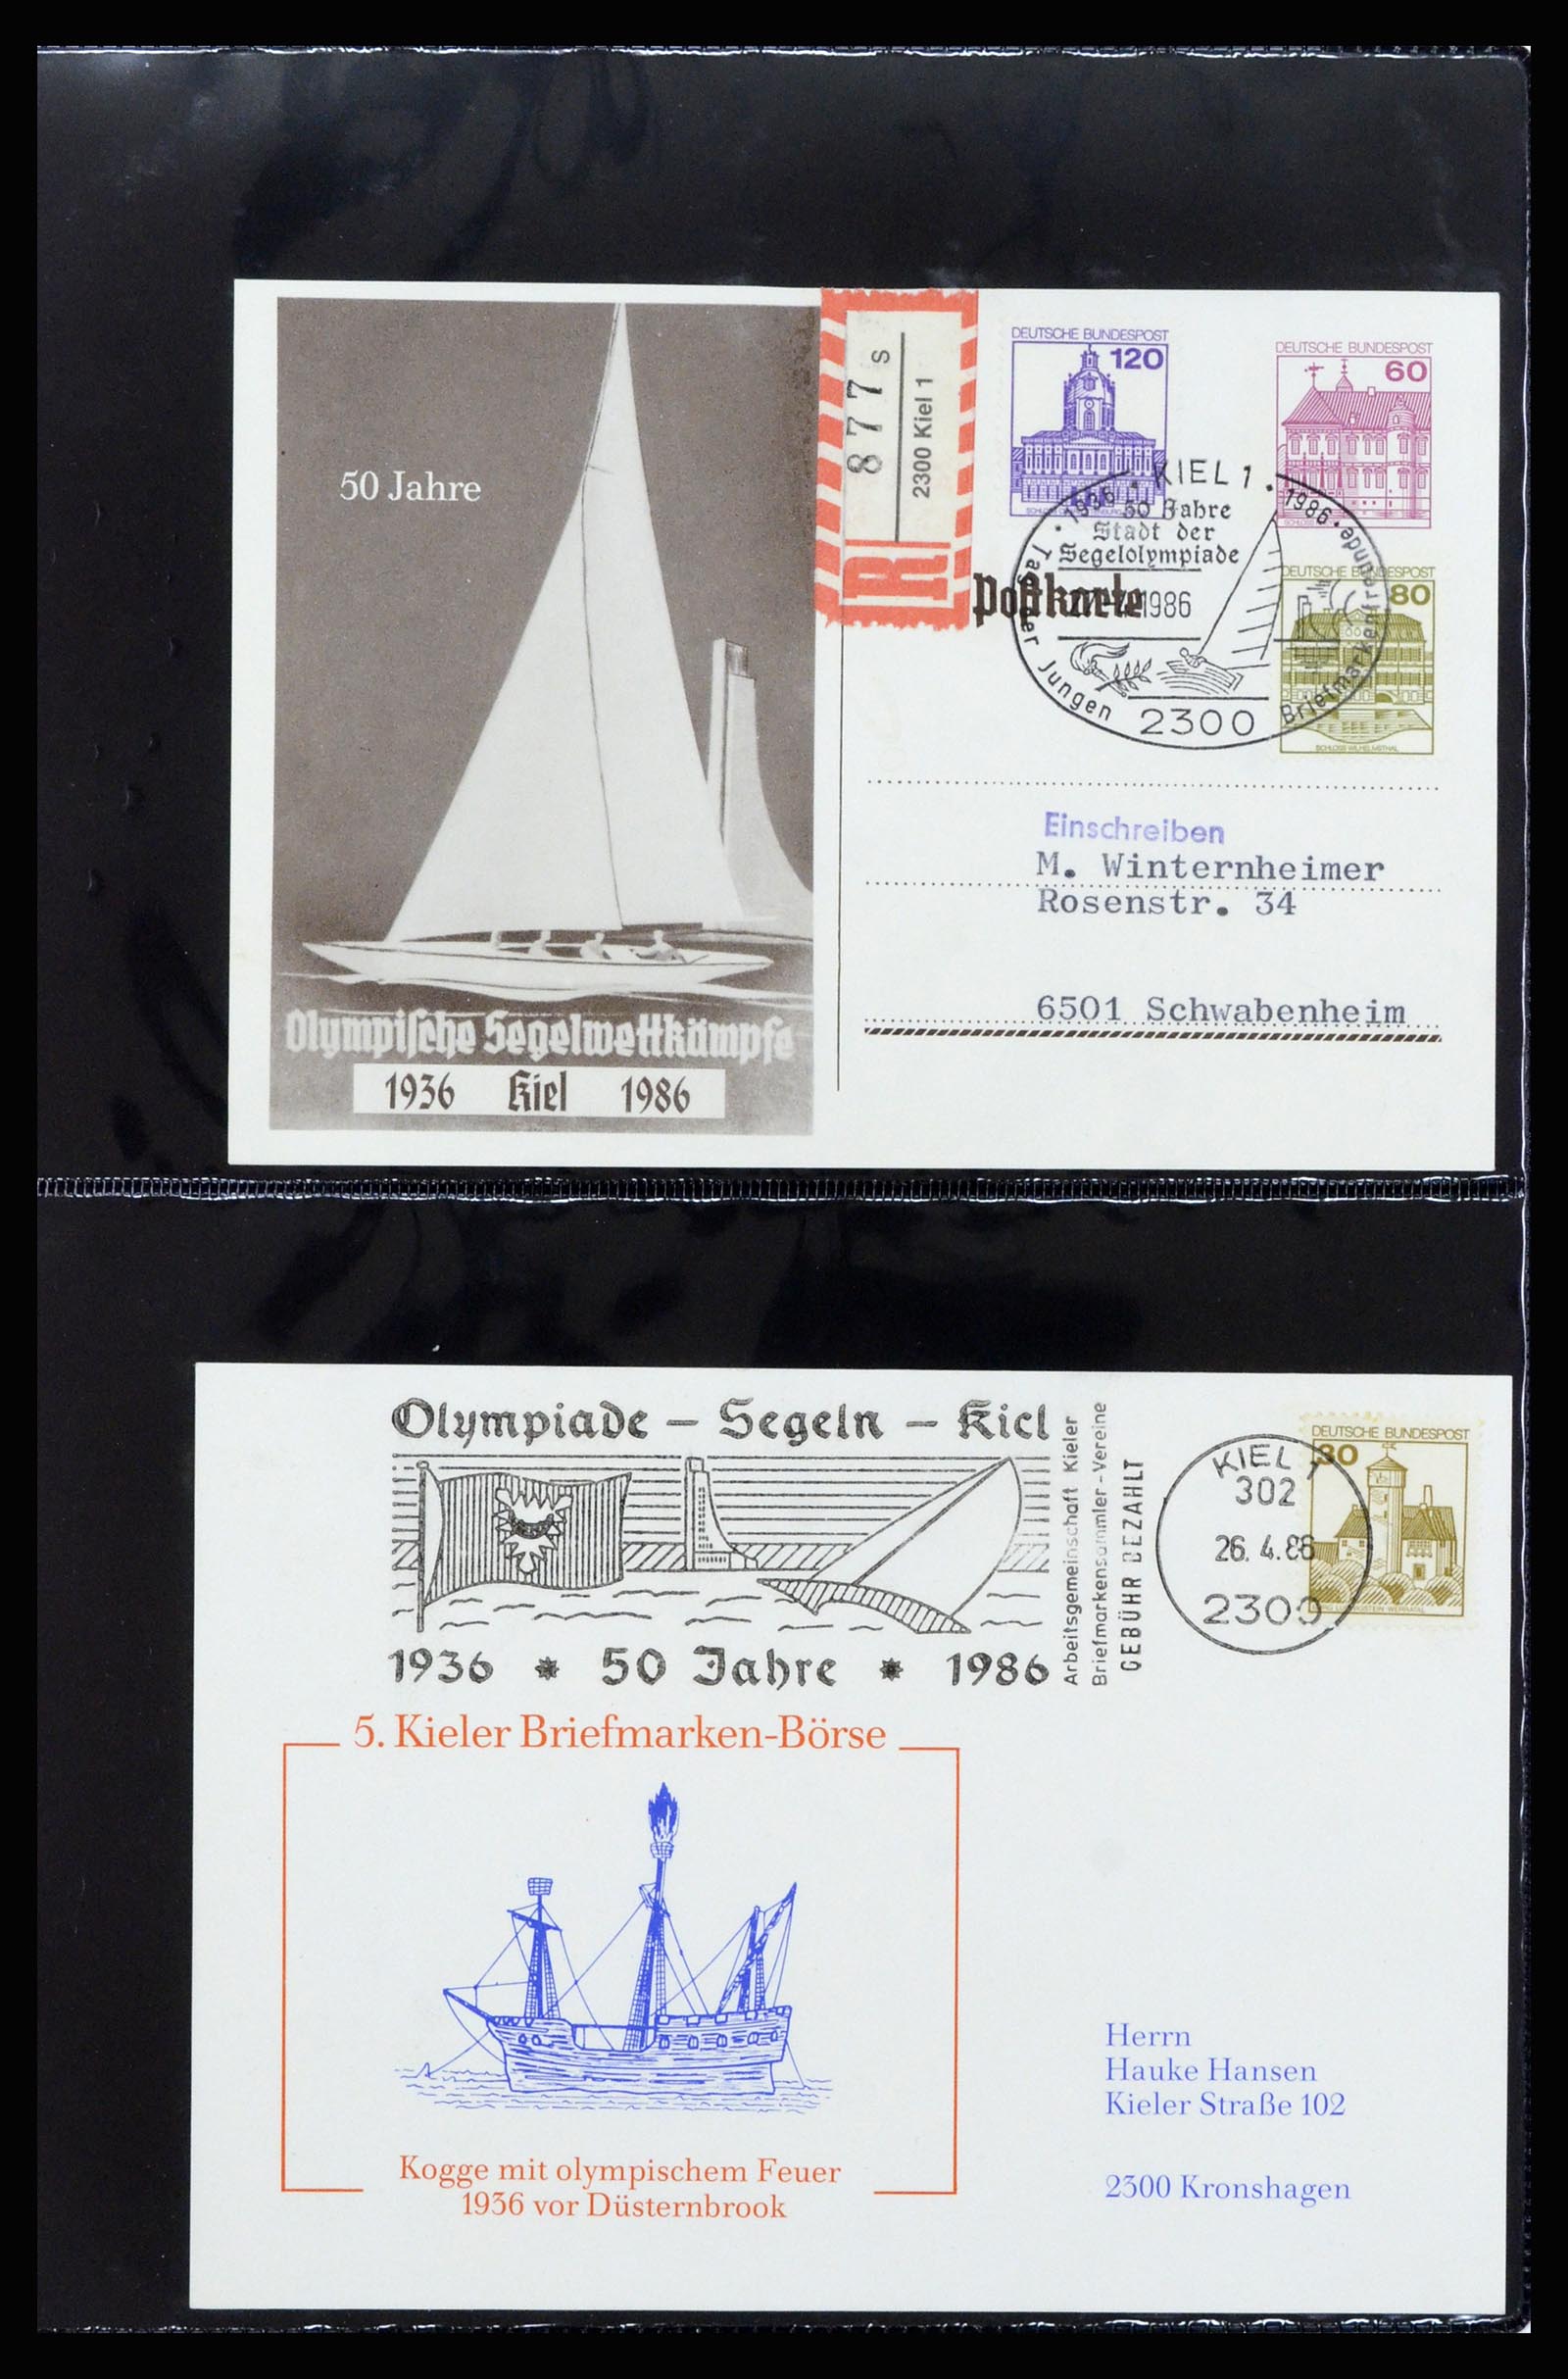 37118 022 - Stamp collection 37118 Olympics 1936.